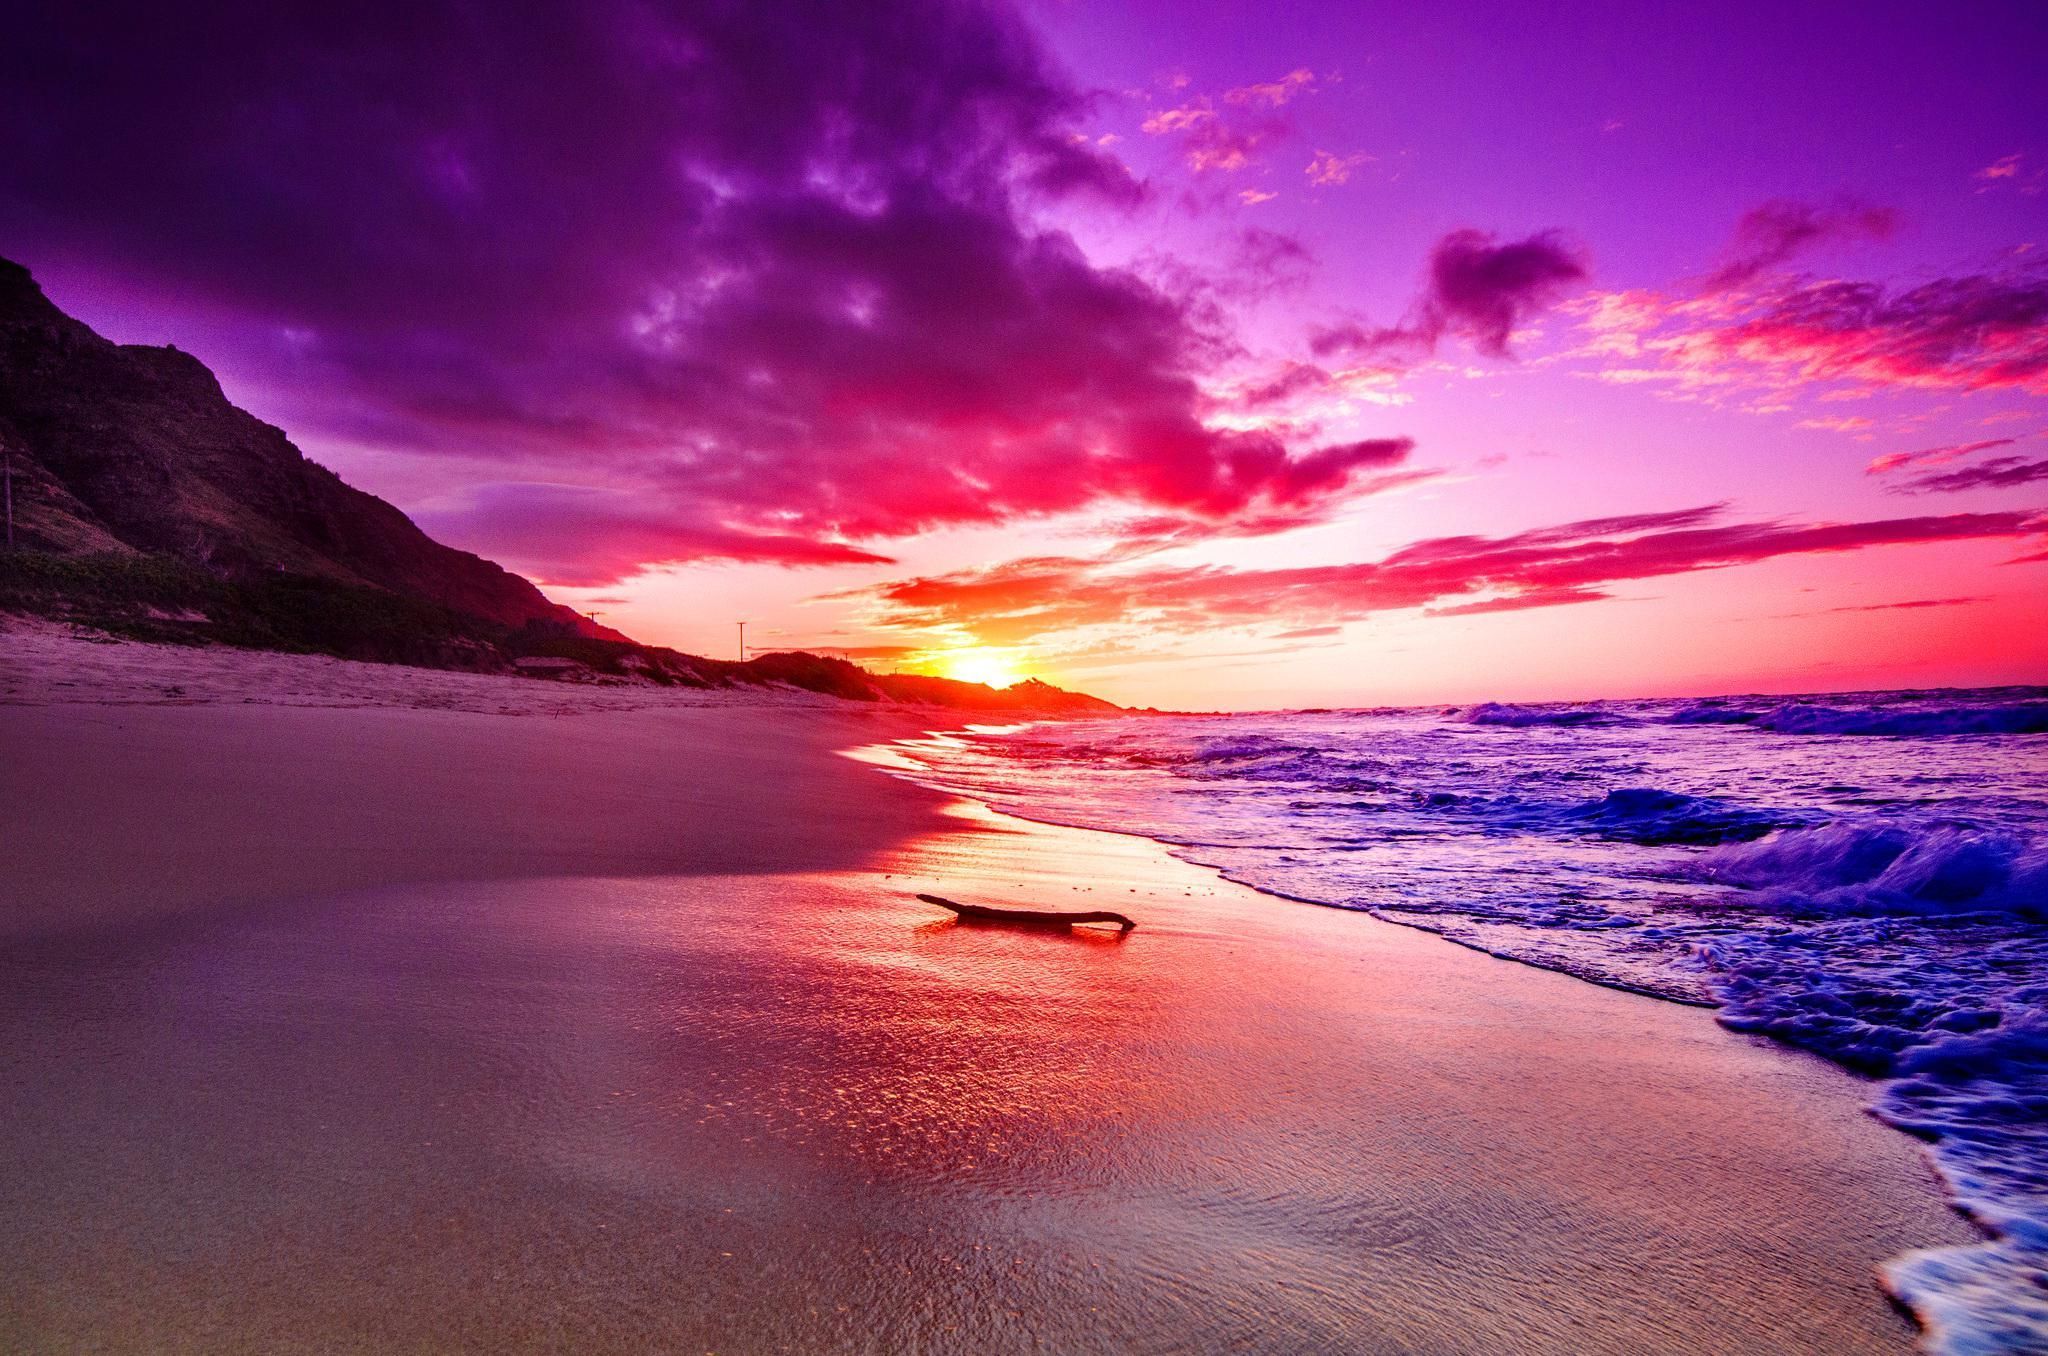 Colorful Beach Sunset Wallpaper Free Colorful Beach Sunset